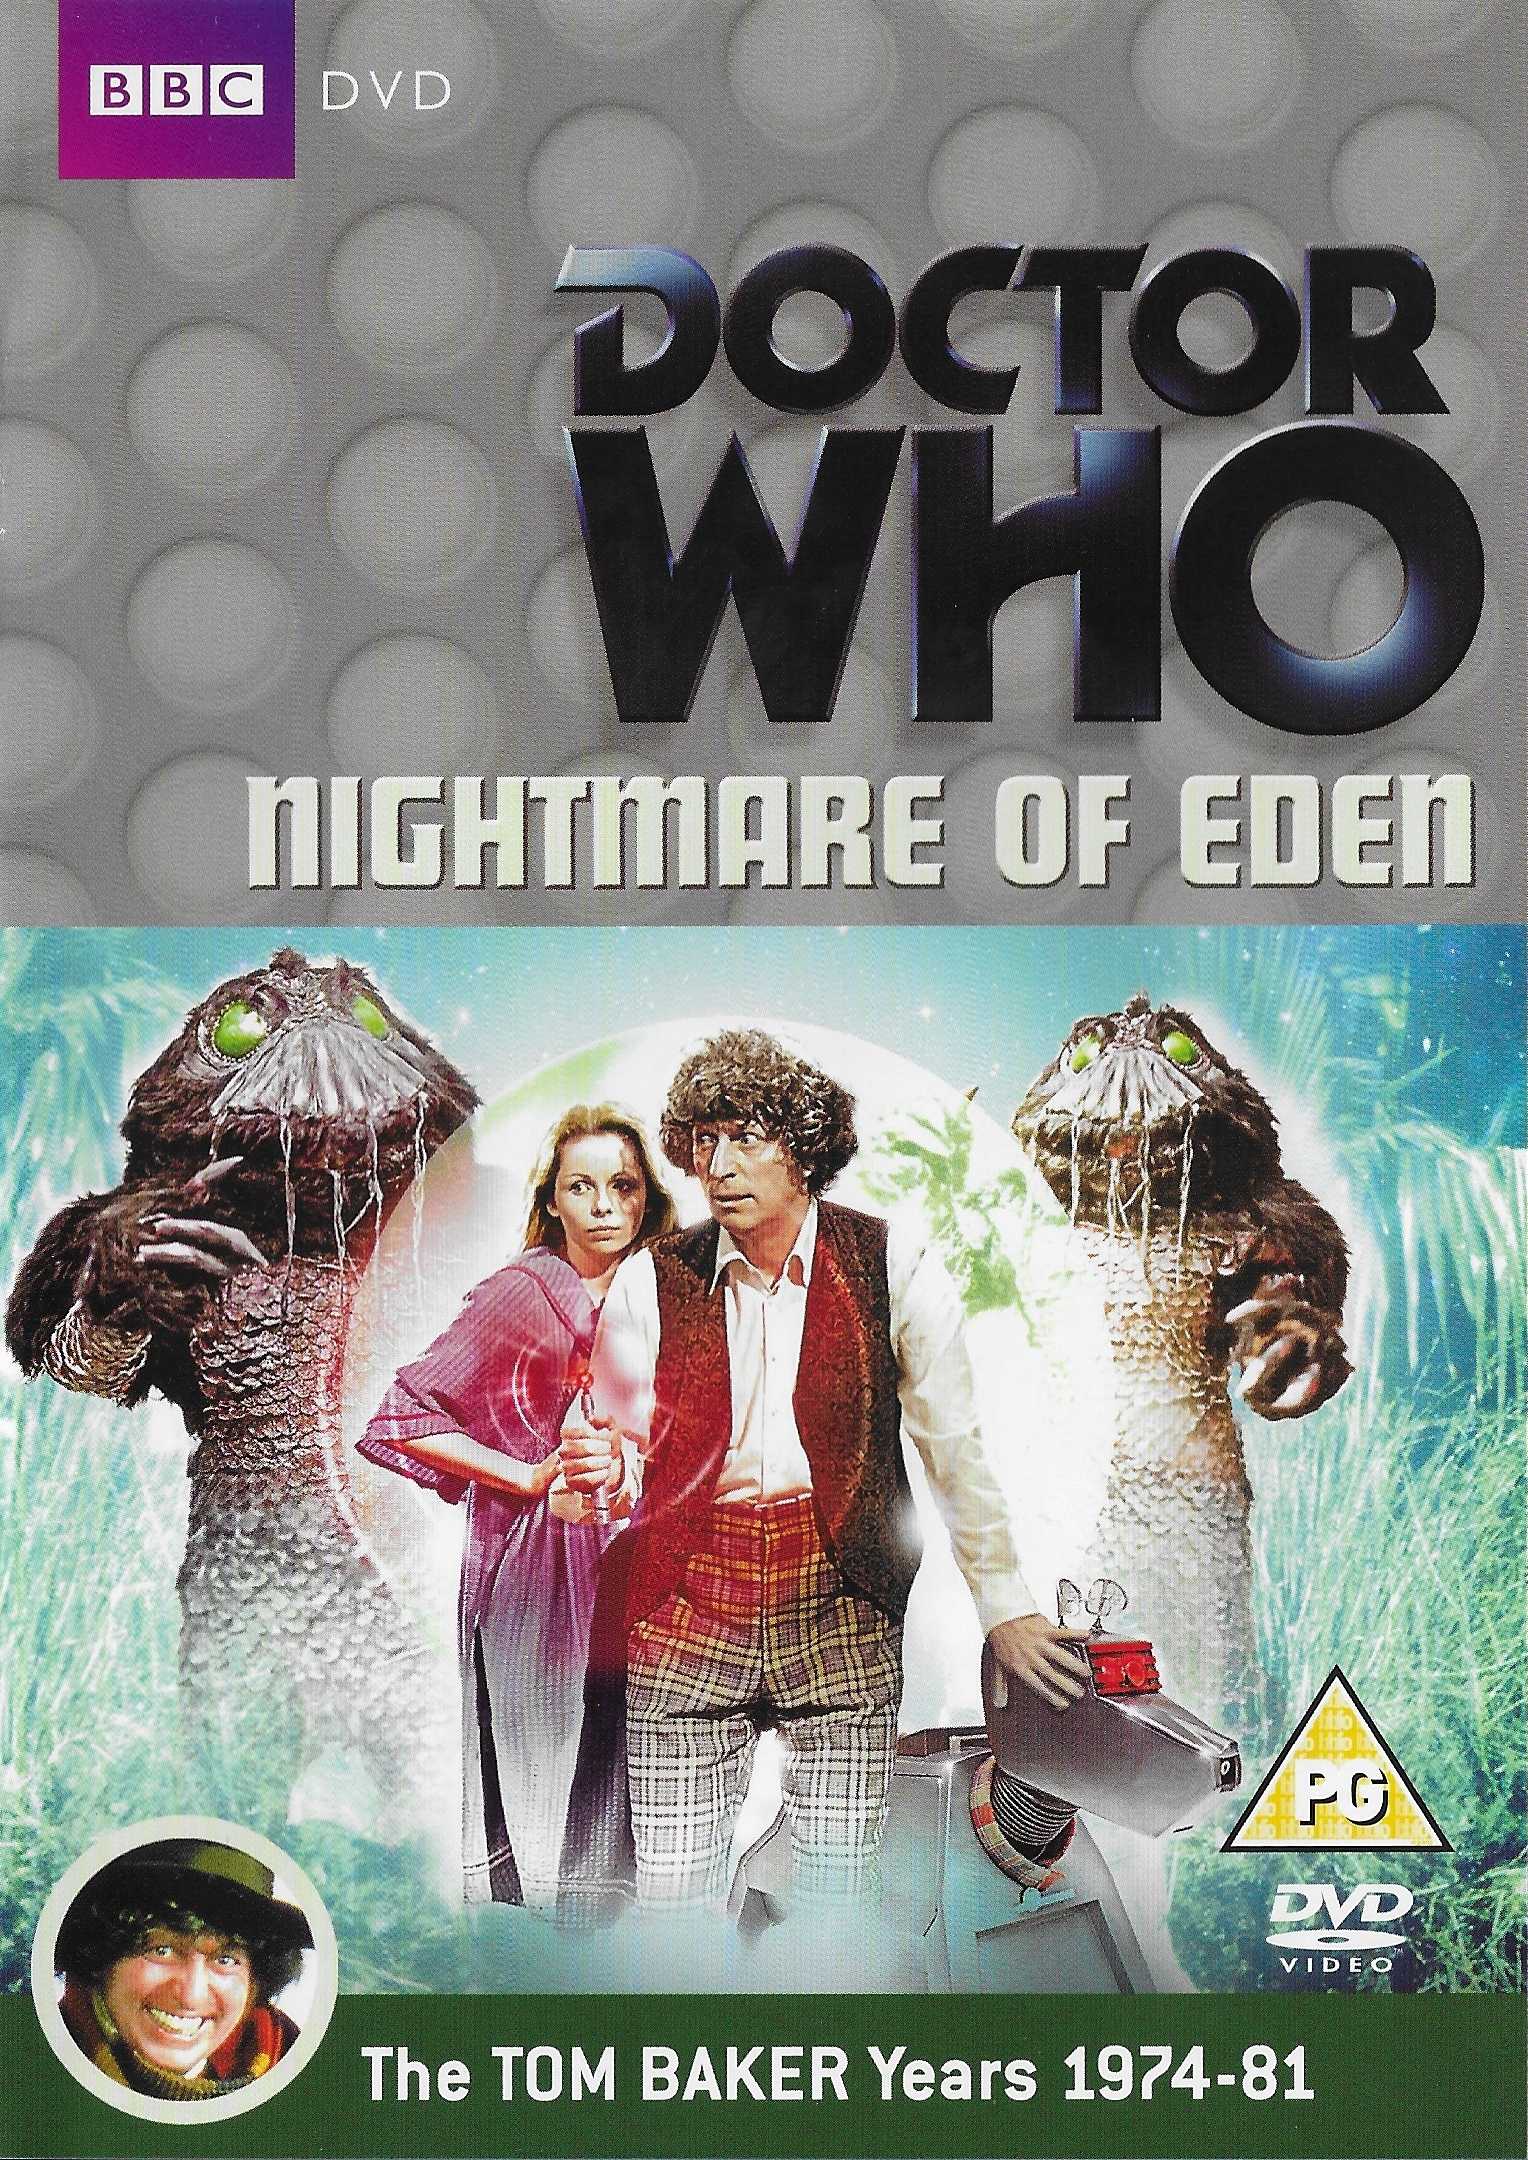 Picture of BBCDVD 3378 Doctor Who - Nightmare of Eden DVD by artist Bob Baker from the BBC records and Tapes library